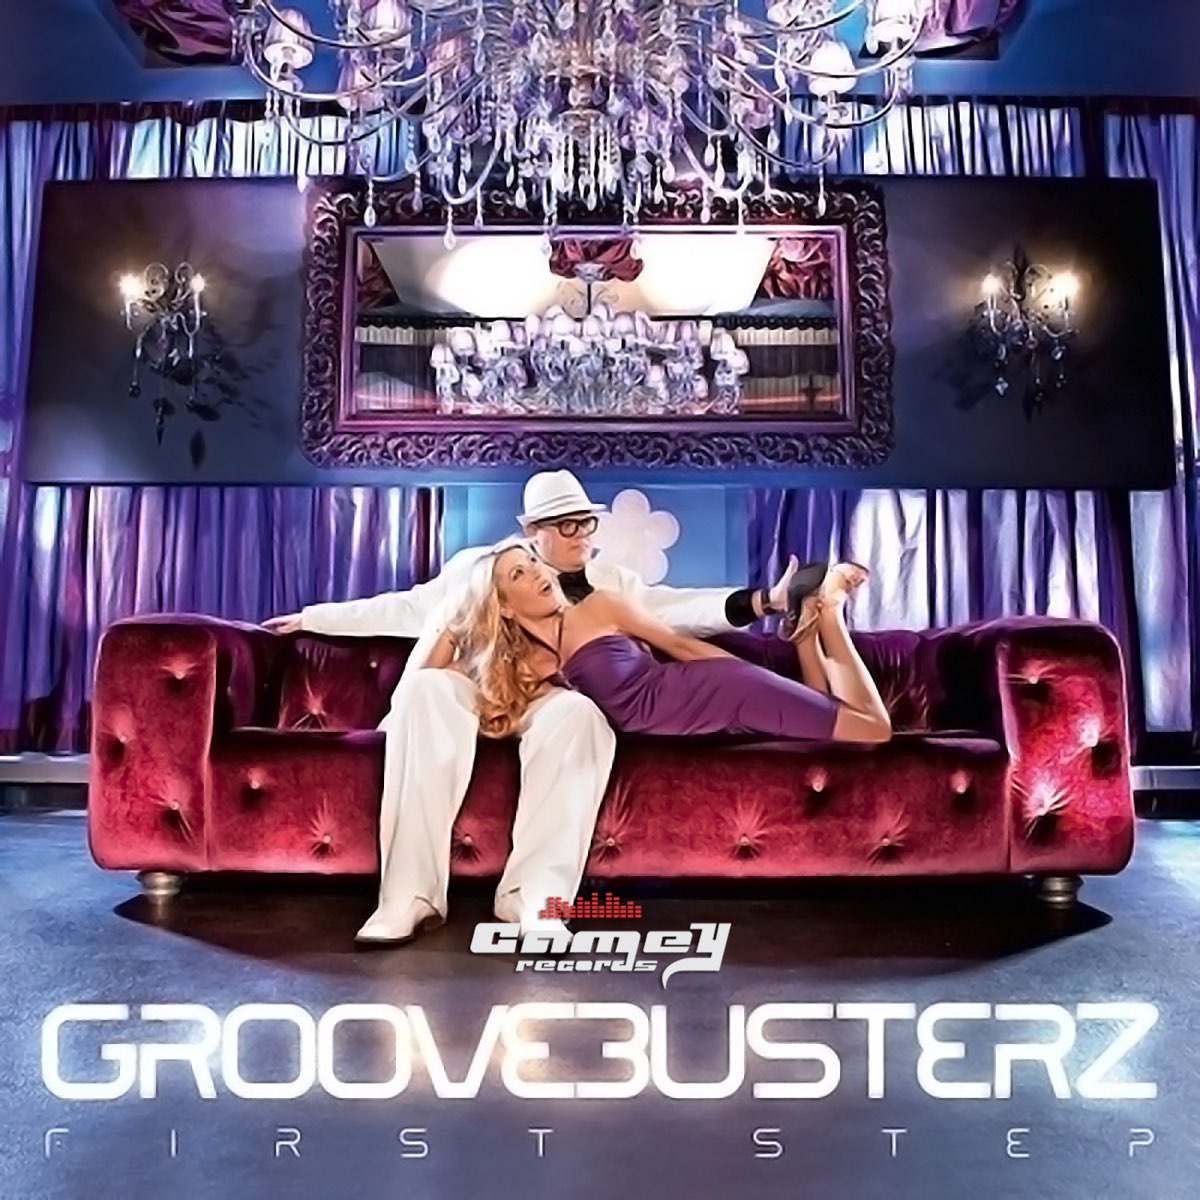 groovebusterz better place to live in usa